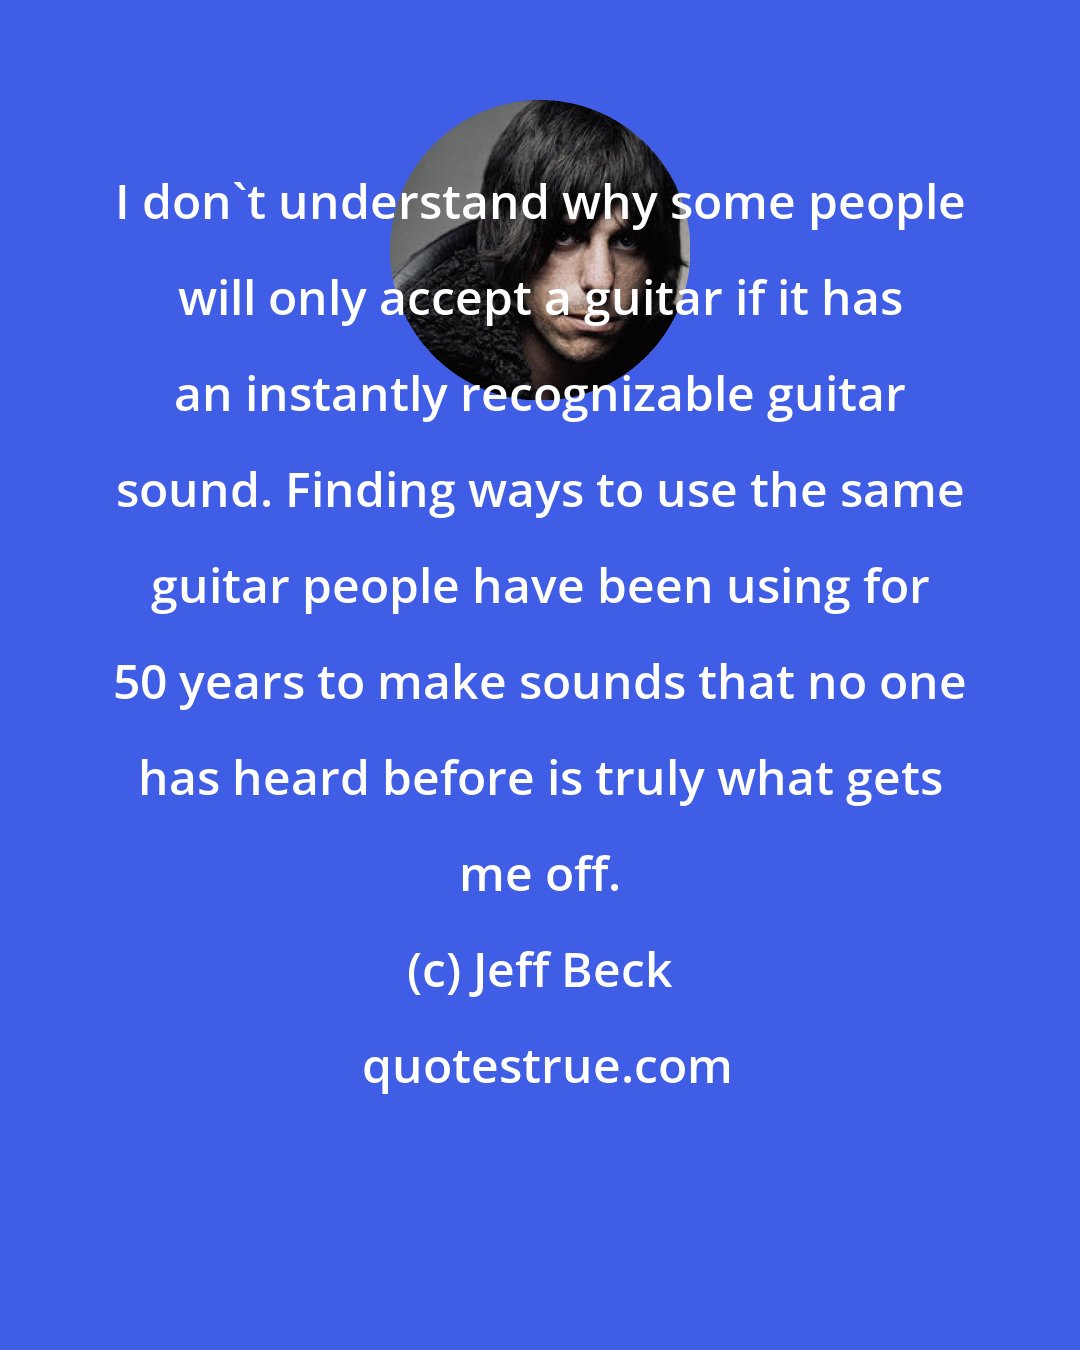 Jeff Beck: I don't understand why some people will only accept a guitar if it has an instantly recognizable guitar sound. Finding ways to use the same guitar people have been using for 50 years to make sounds that no one has heard before is truly what gets me off.